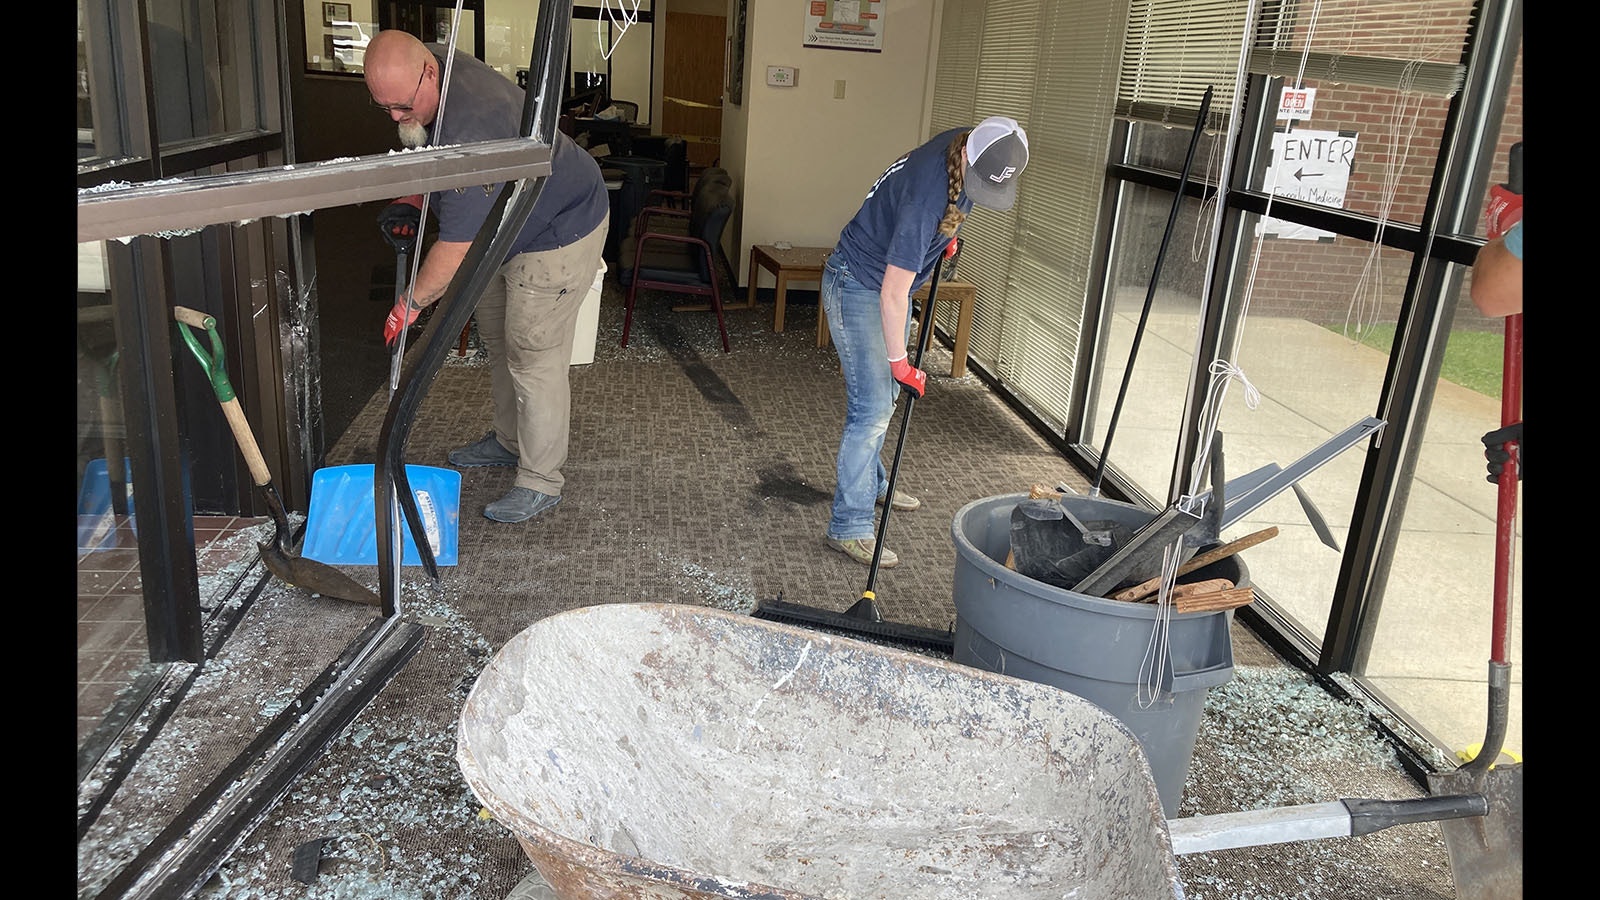 Workers clean up the aftermath of a vehicle driving through the front lobby of Wind River Clinic in Riverton on Thursday morning.